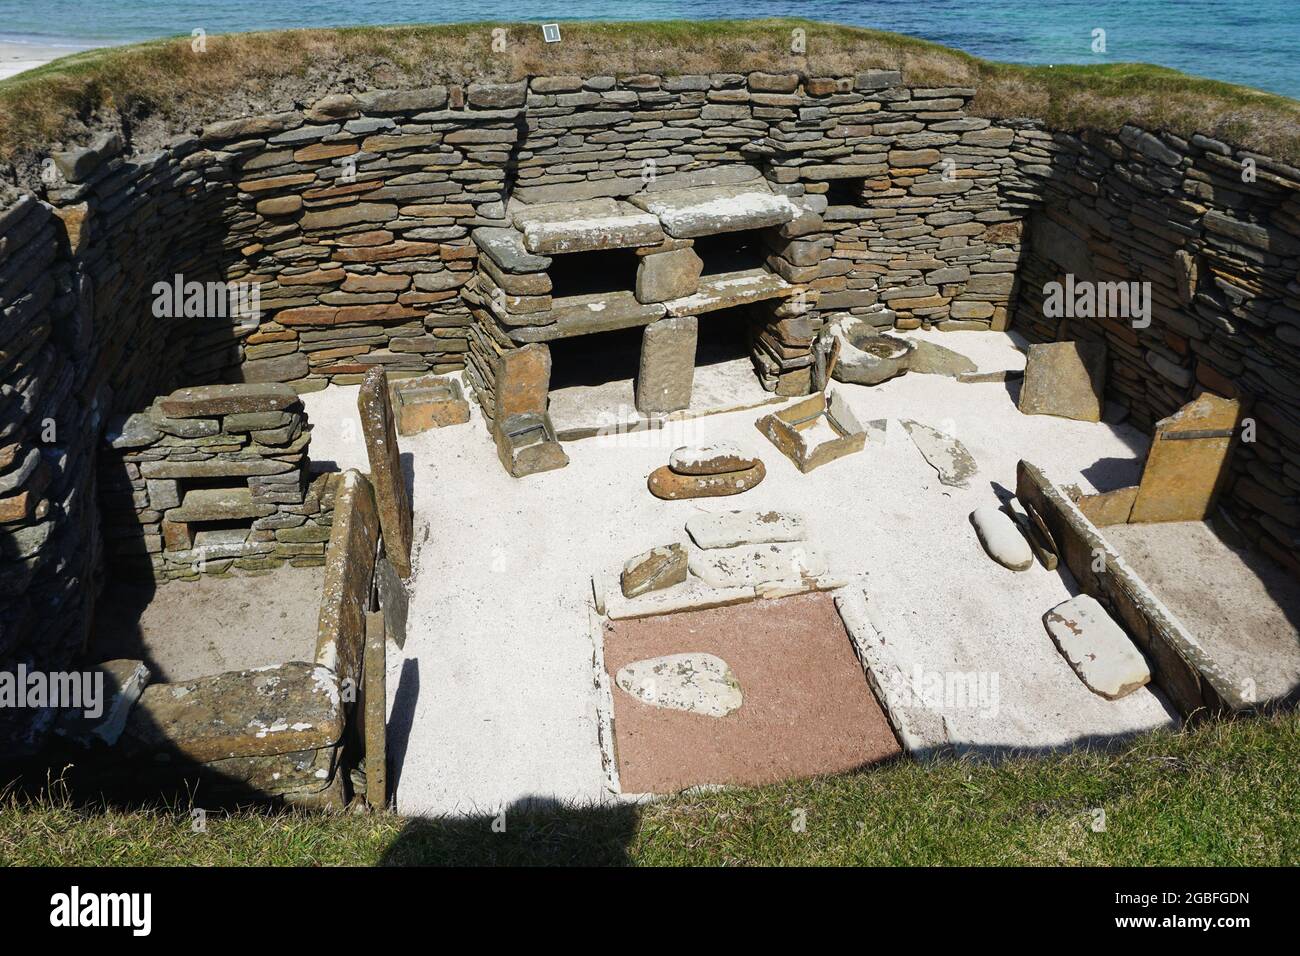 View into one of the restored ancient structures at Skara Brae, an ancient Neolithic village located on Scotland's Orkney Island. Stock Photo